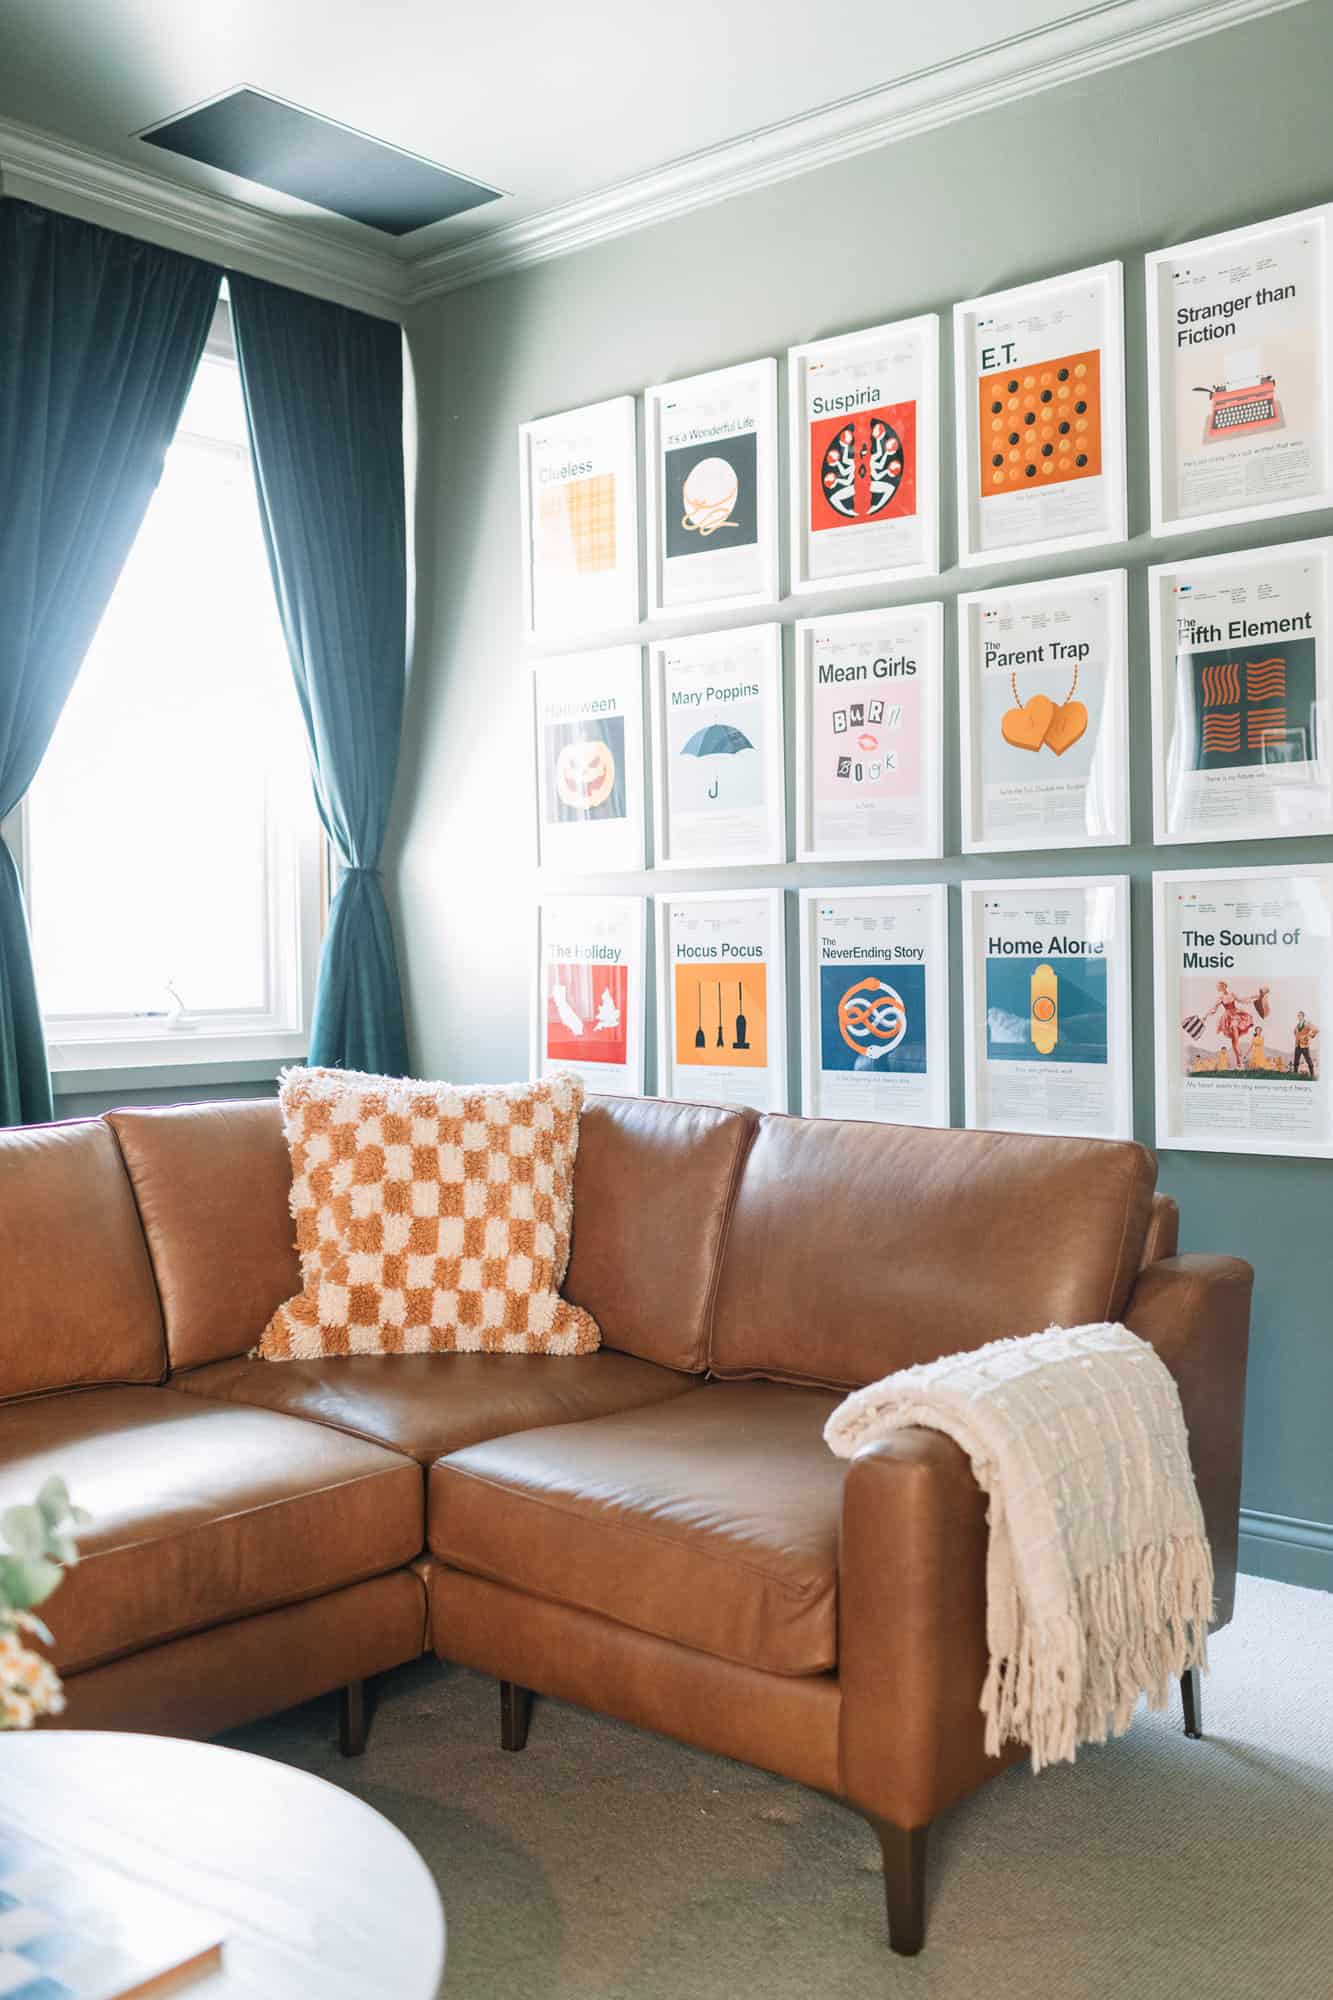 leather sectional and movie room wall art